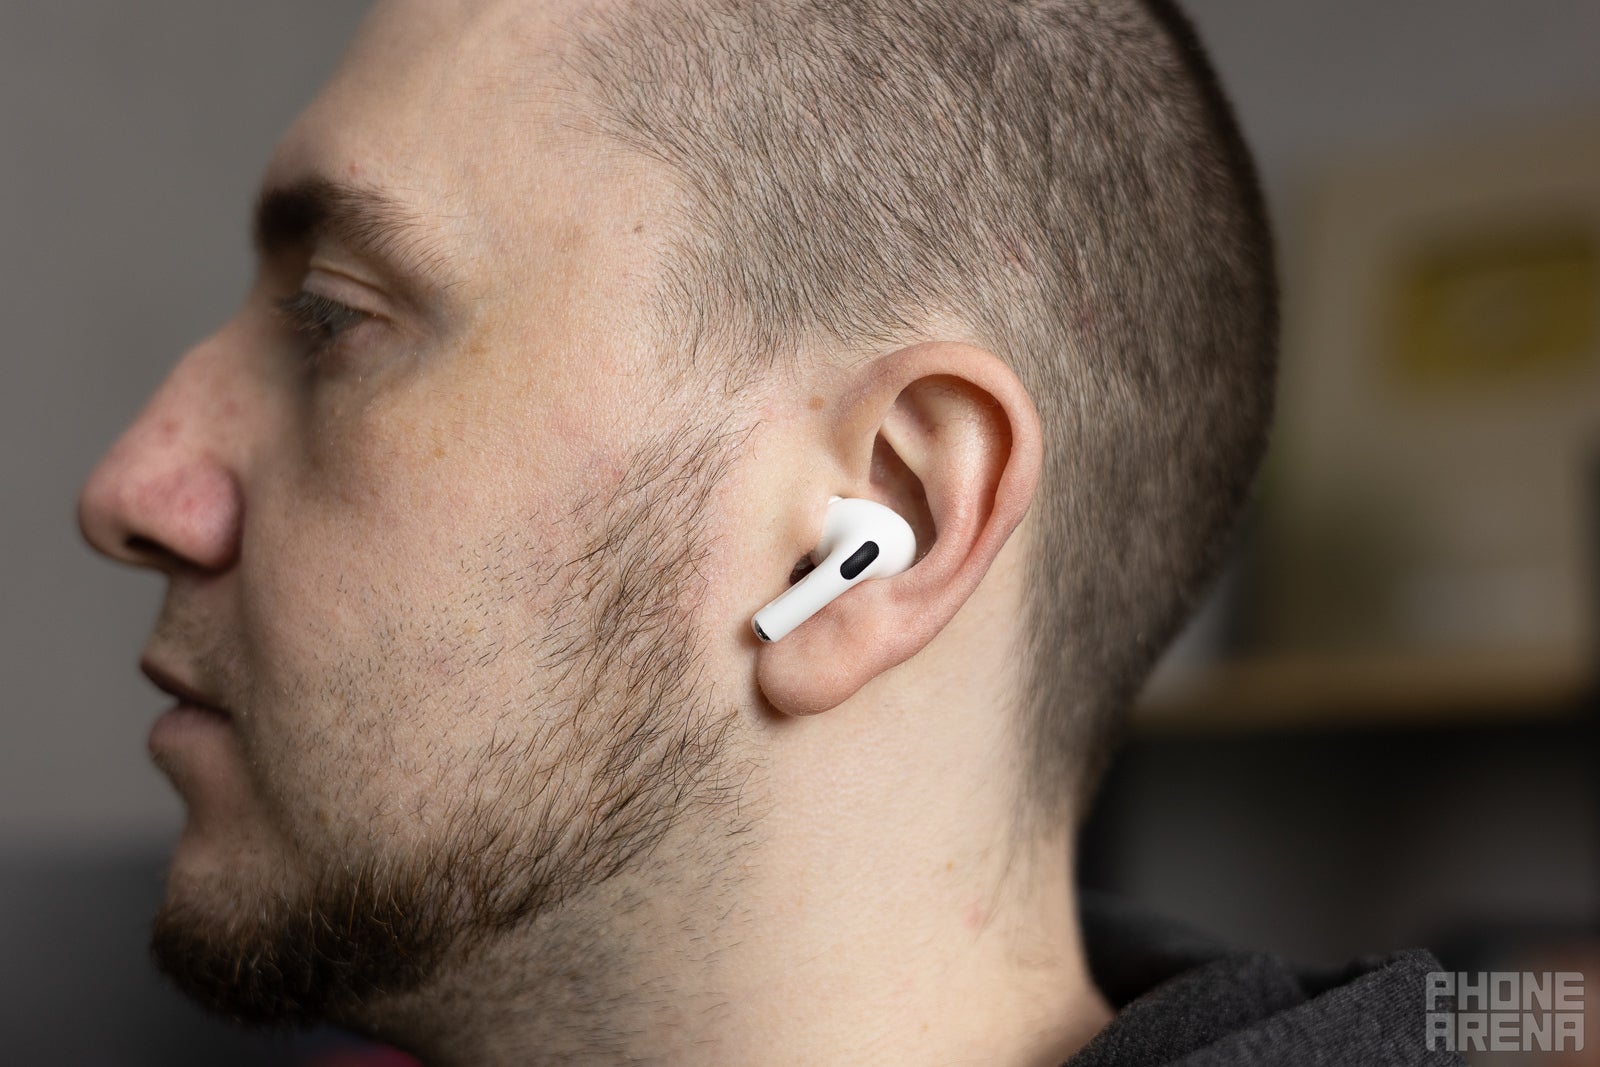 (Image Credit - PhoneArena) AirPods Pro 2 earbuds in ear - AirPods Pro 2 review: Closer to perfection